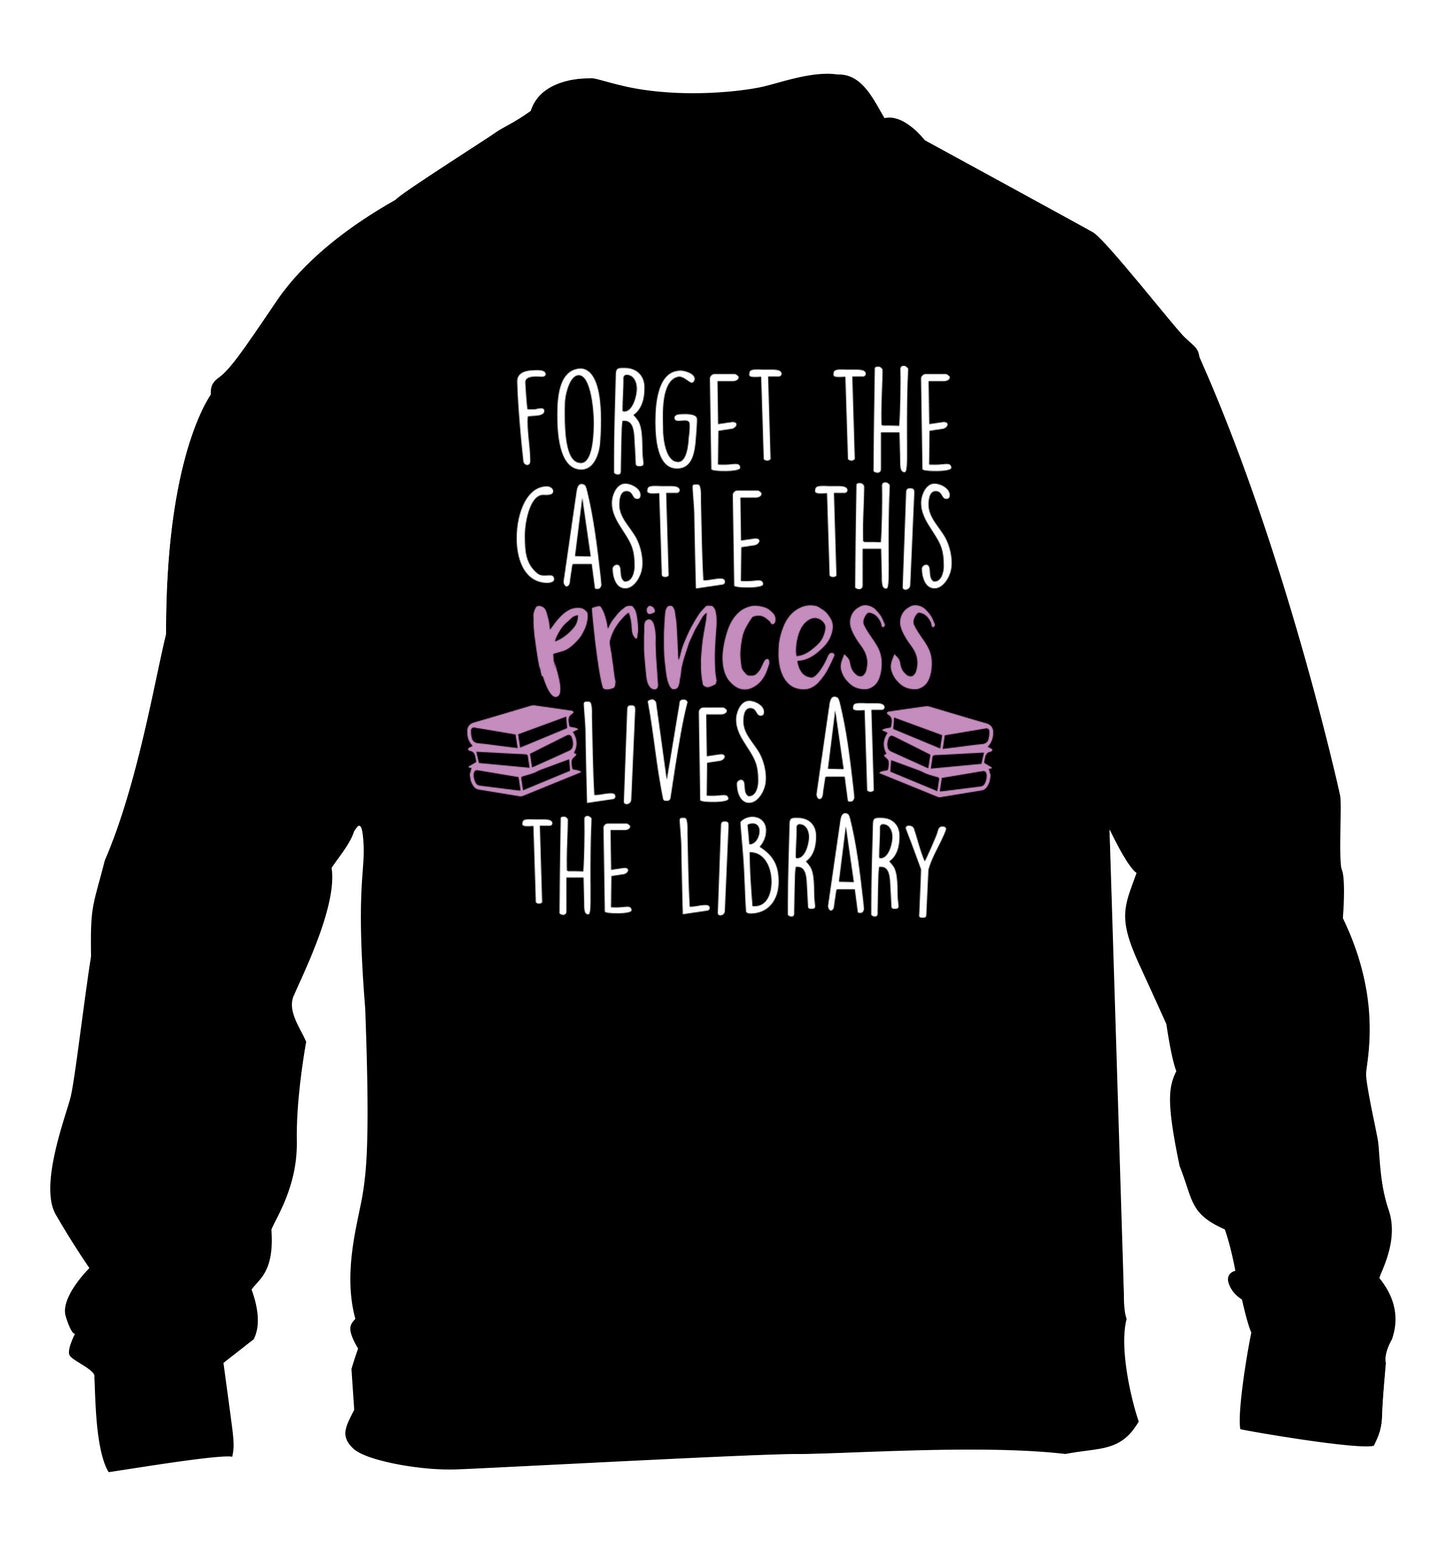 Forget the castle this princess lives at the library children's black sweater 12-14 Years